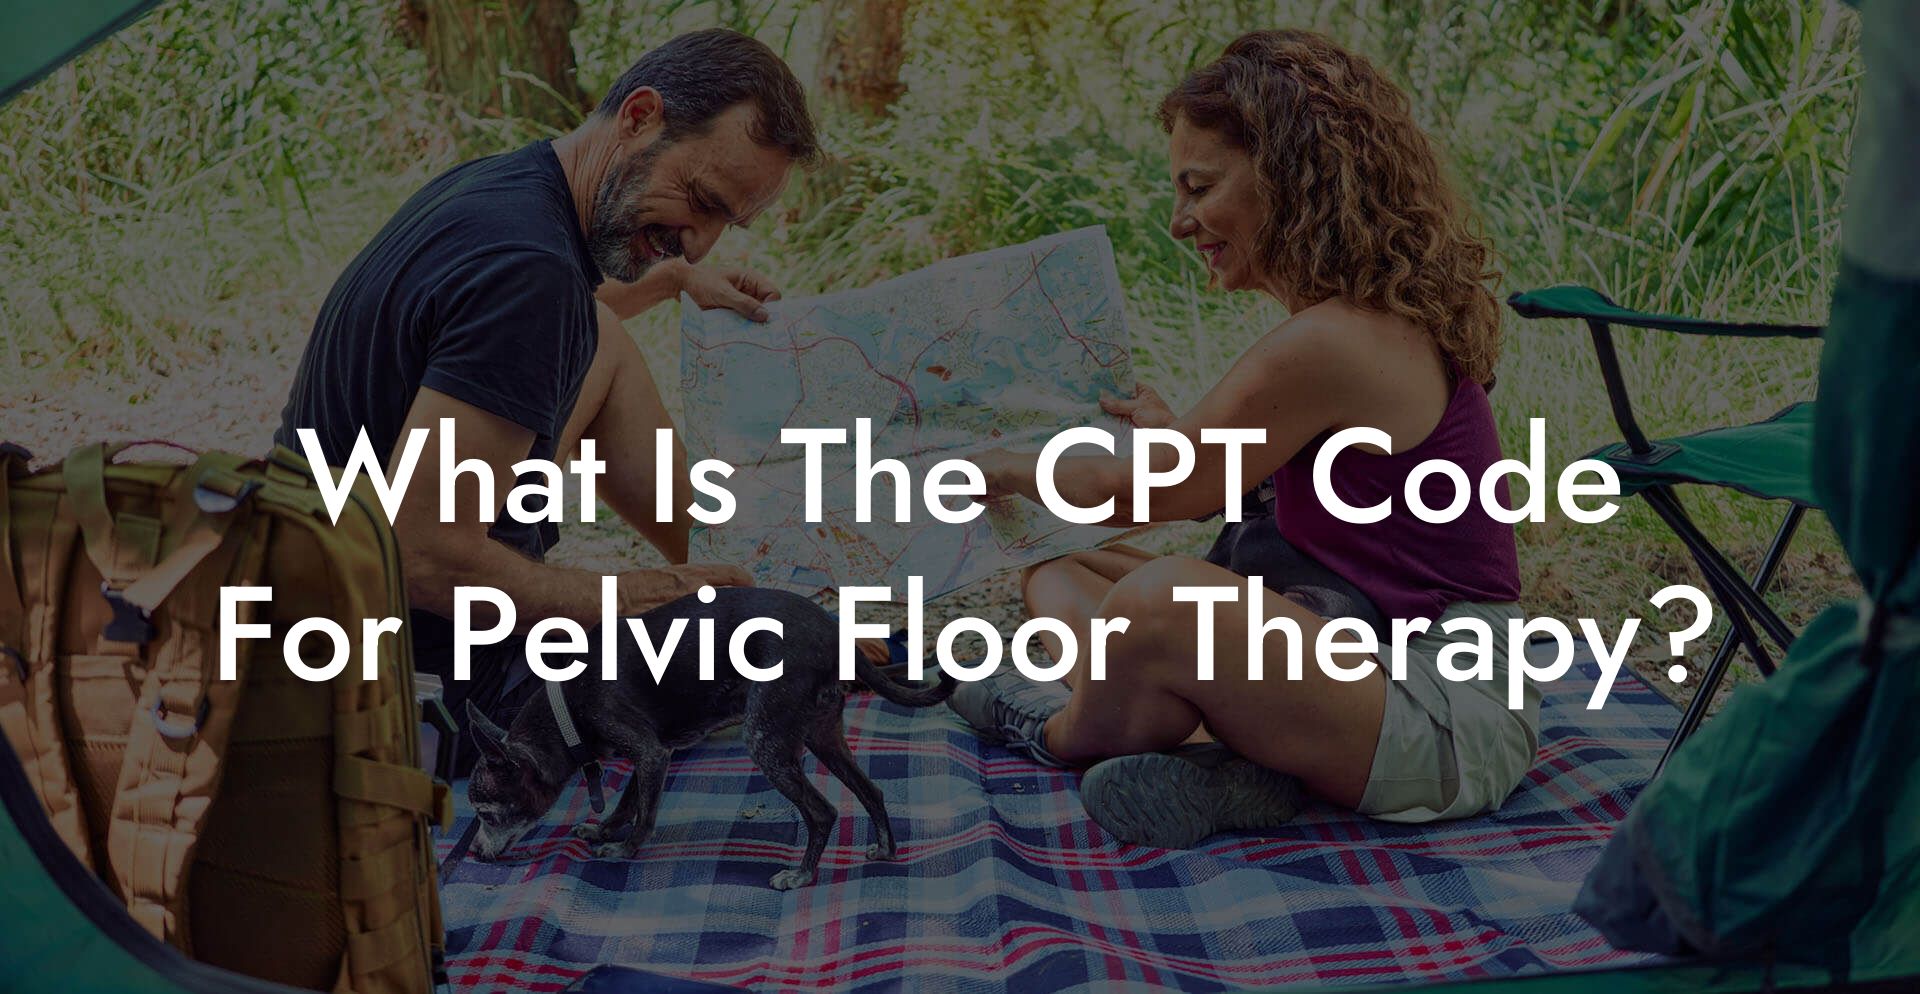 What Is The CPT Code For Pelvic Floor Therapy?